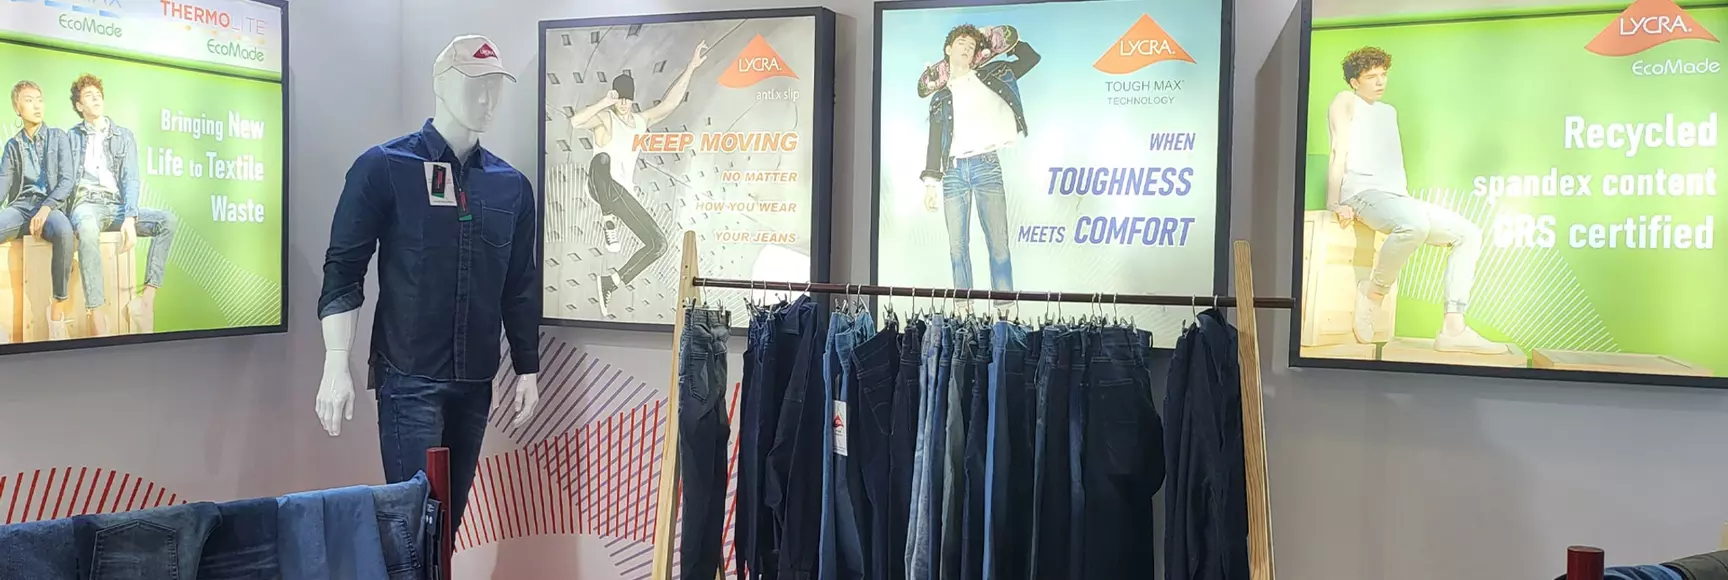 The LYCRA Company booth at the India Denimand Jeans show featured a mannequin dressed in LYCRA® brand denim jeans and  shirt.